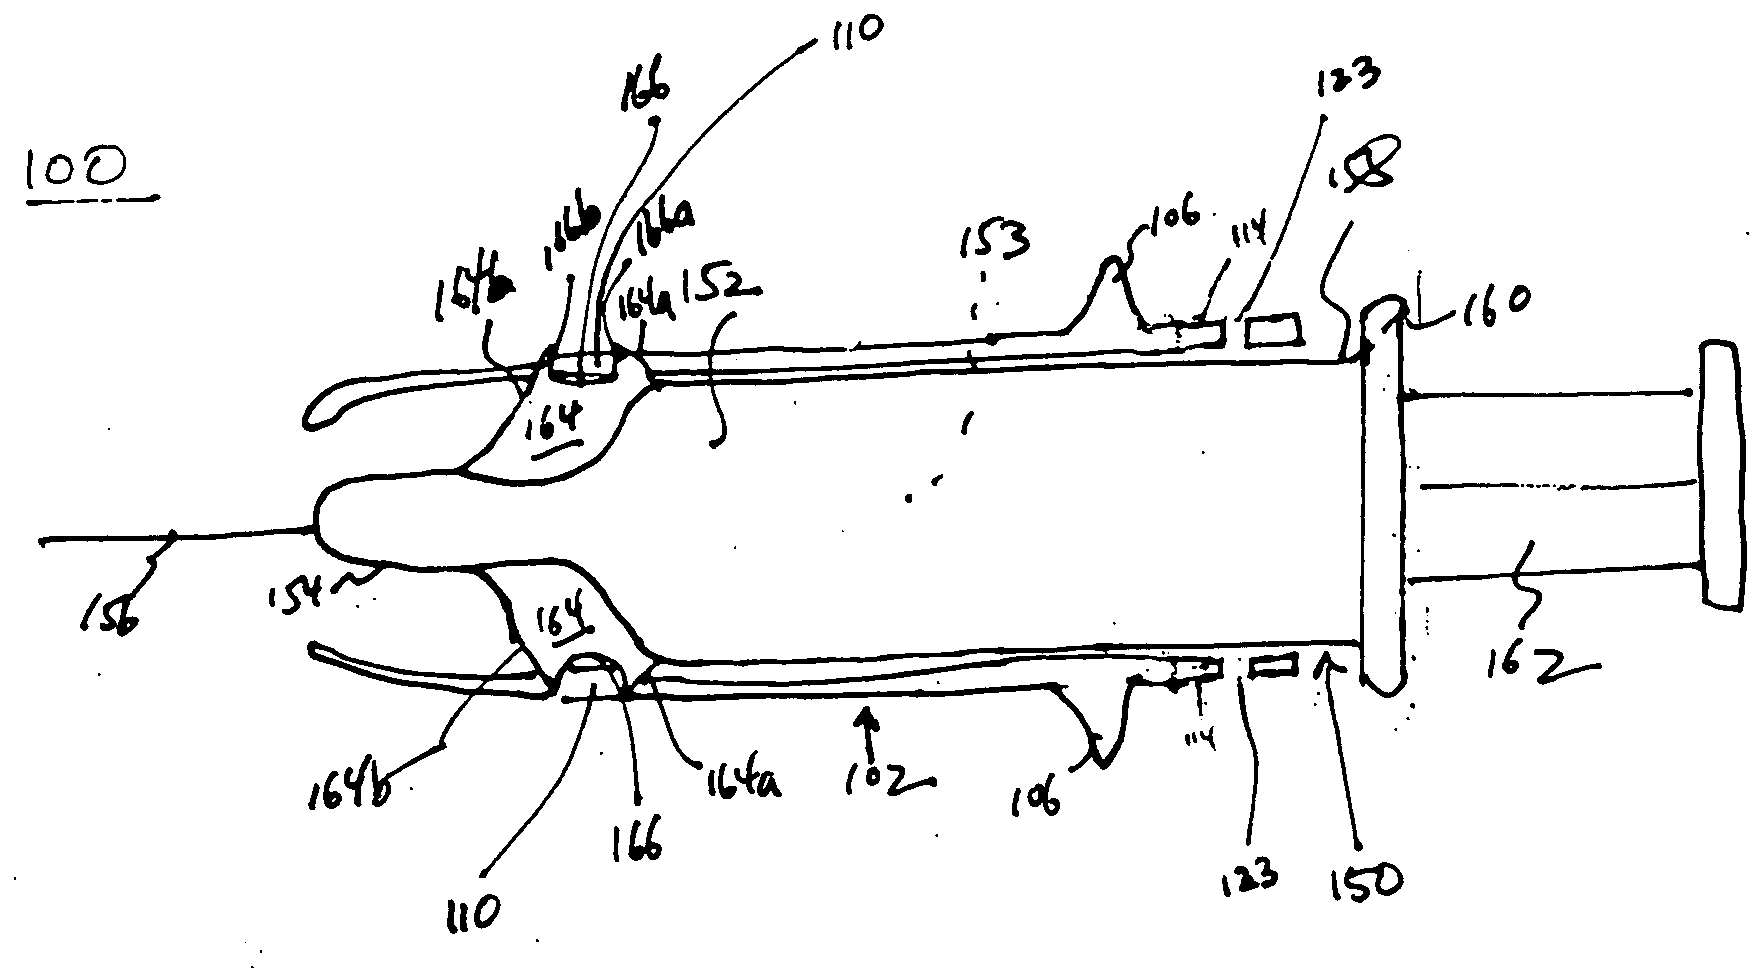 Syringe with integral safety system